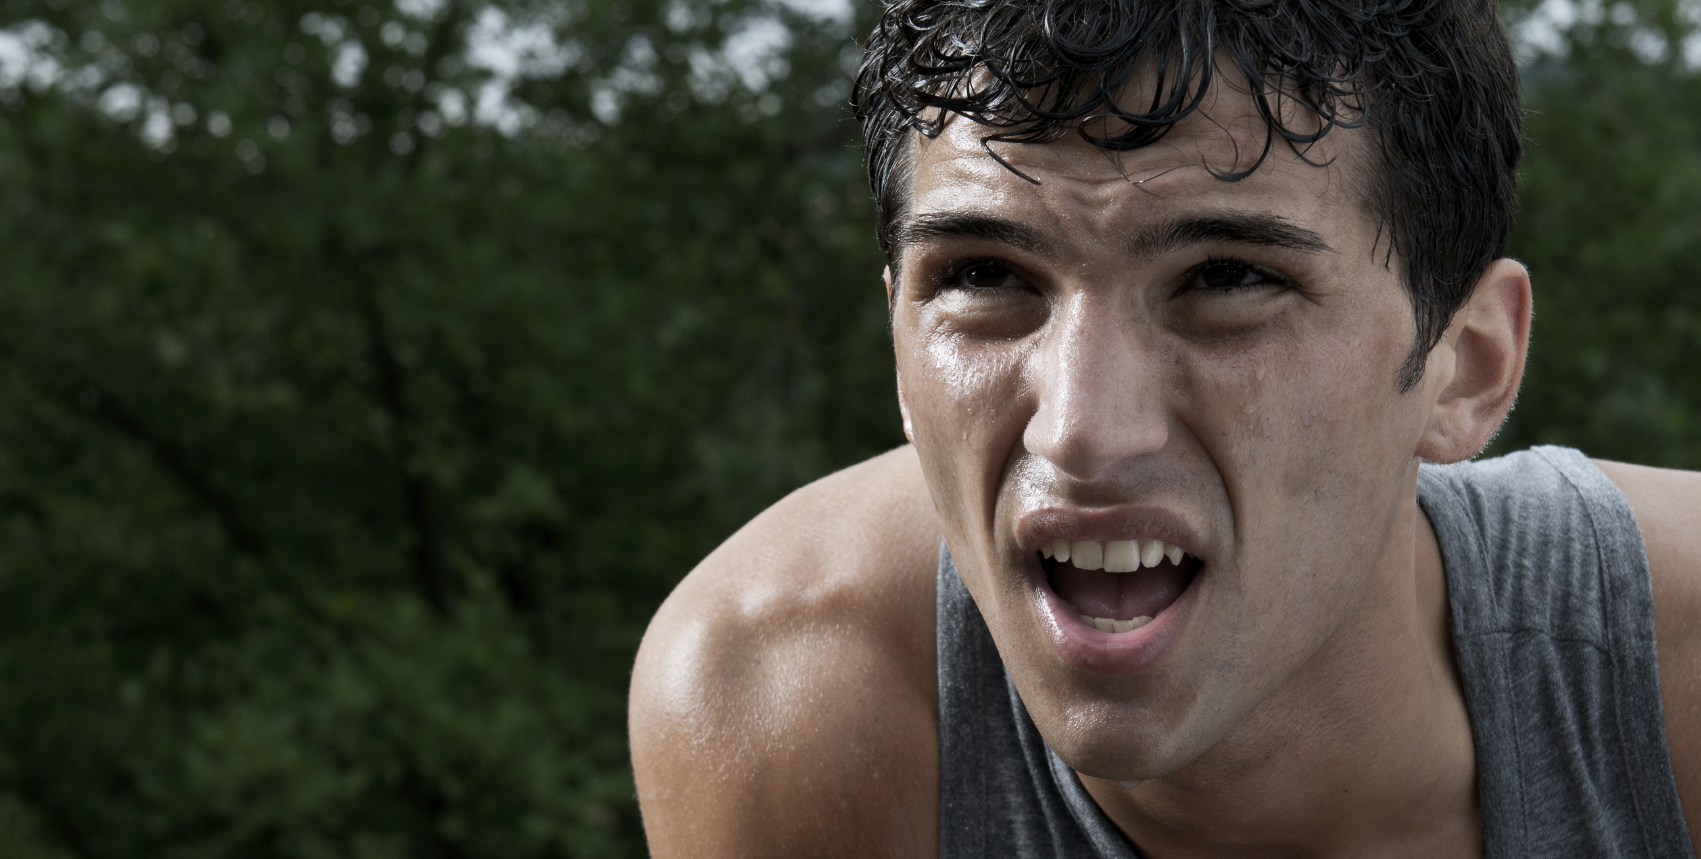 Exhausted runner taking a breath - Running workouts